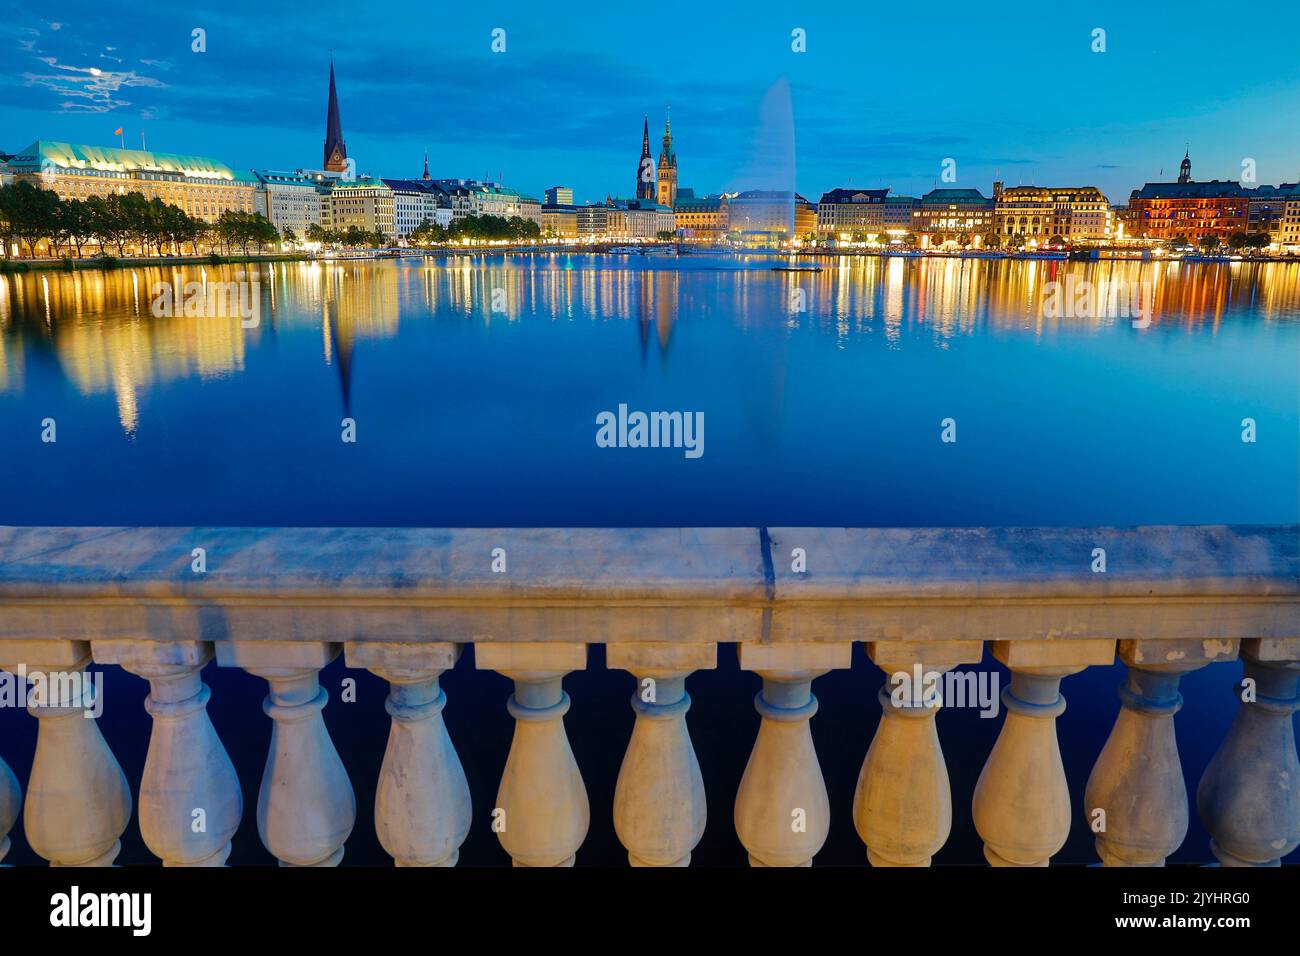 Inner Alster Lake with fountain and city scape in the evening, Germany, Hamburg Stock Photo